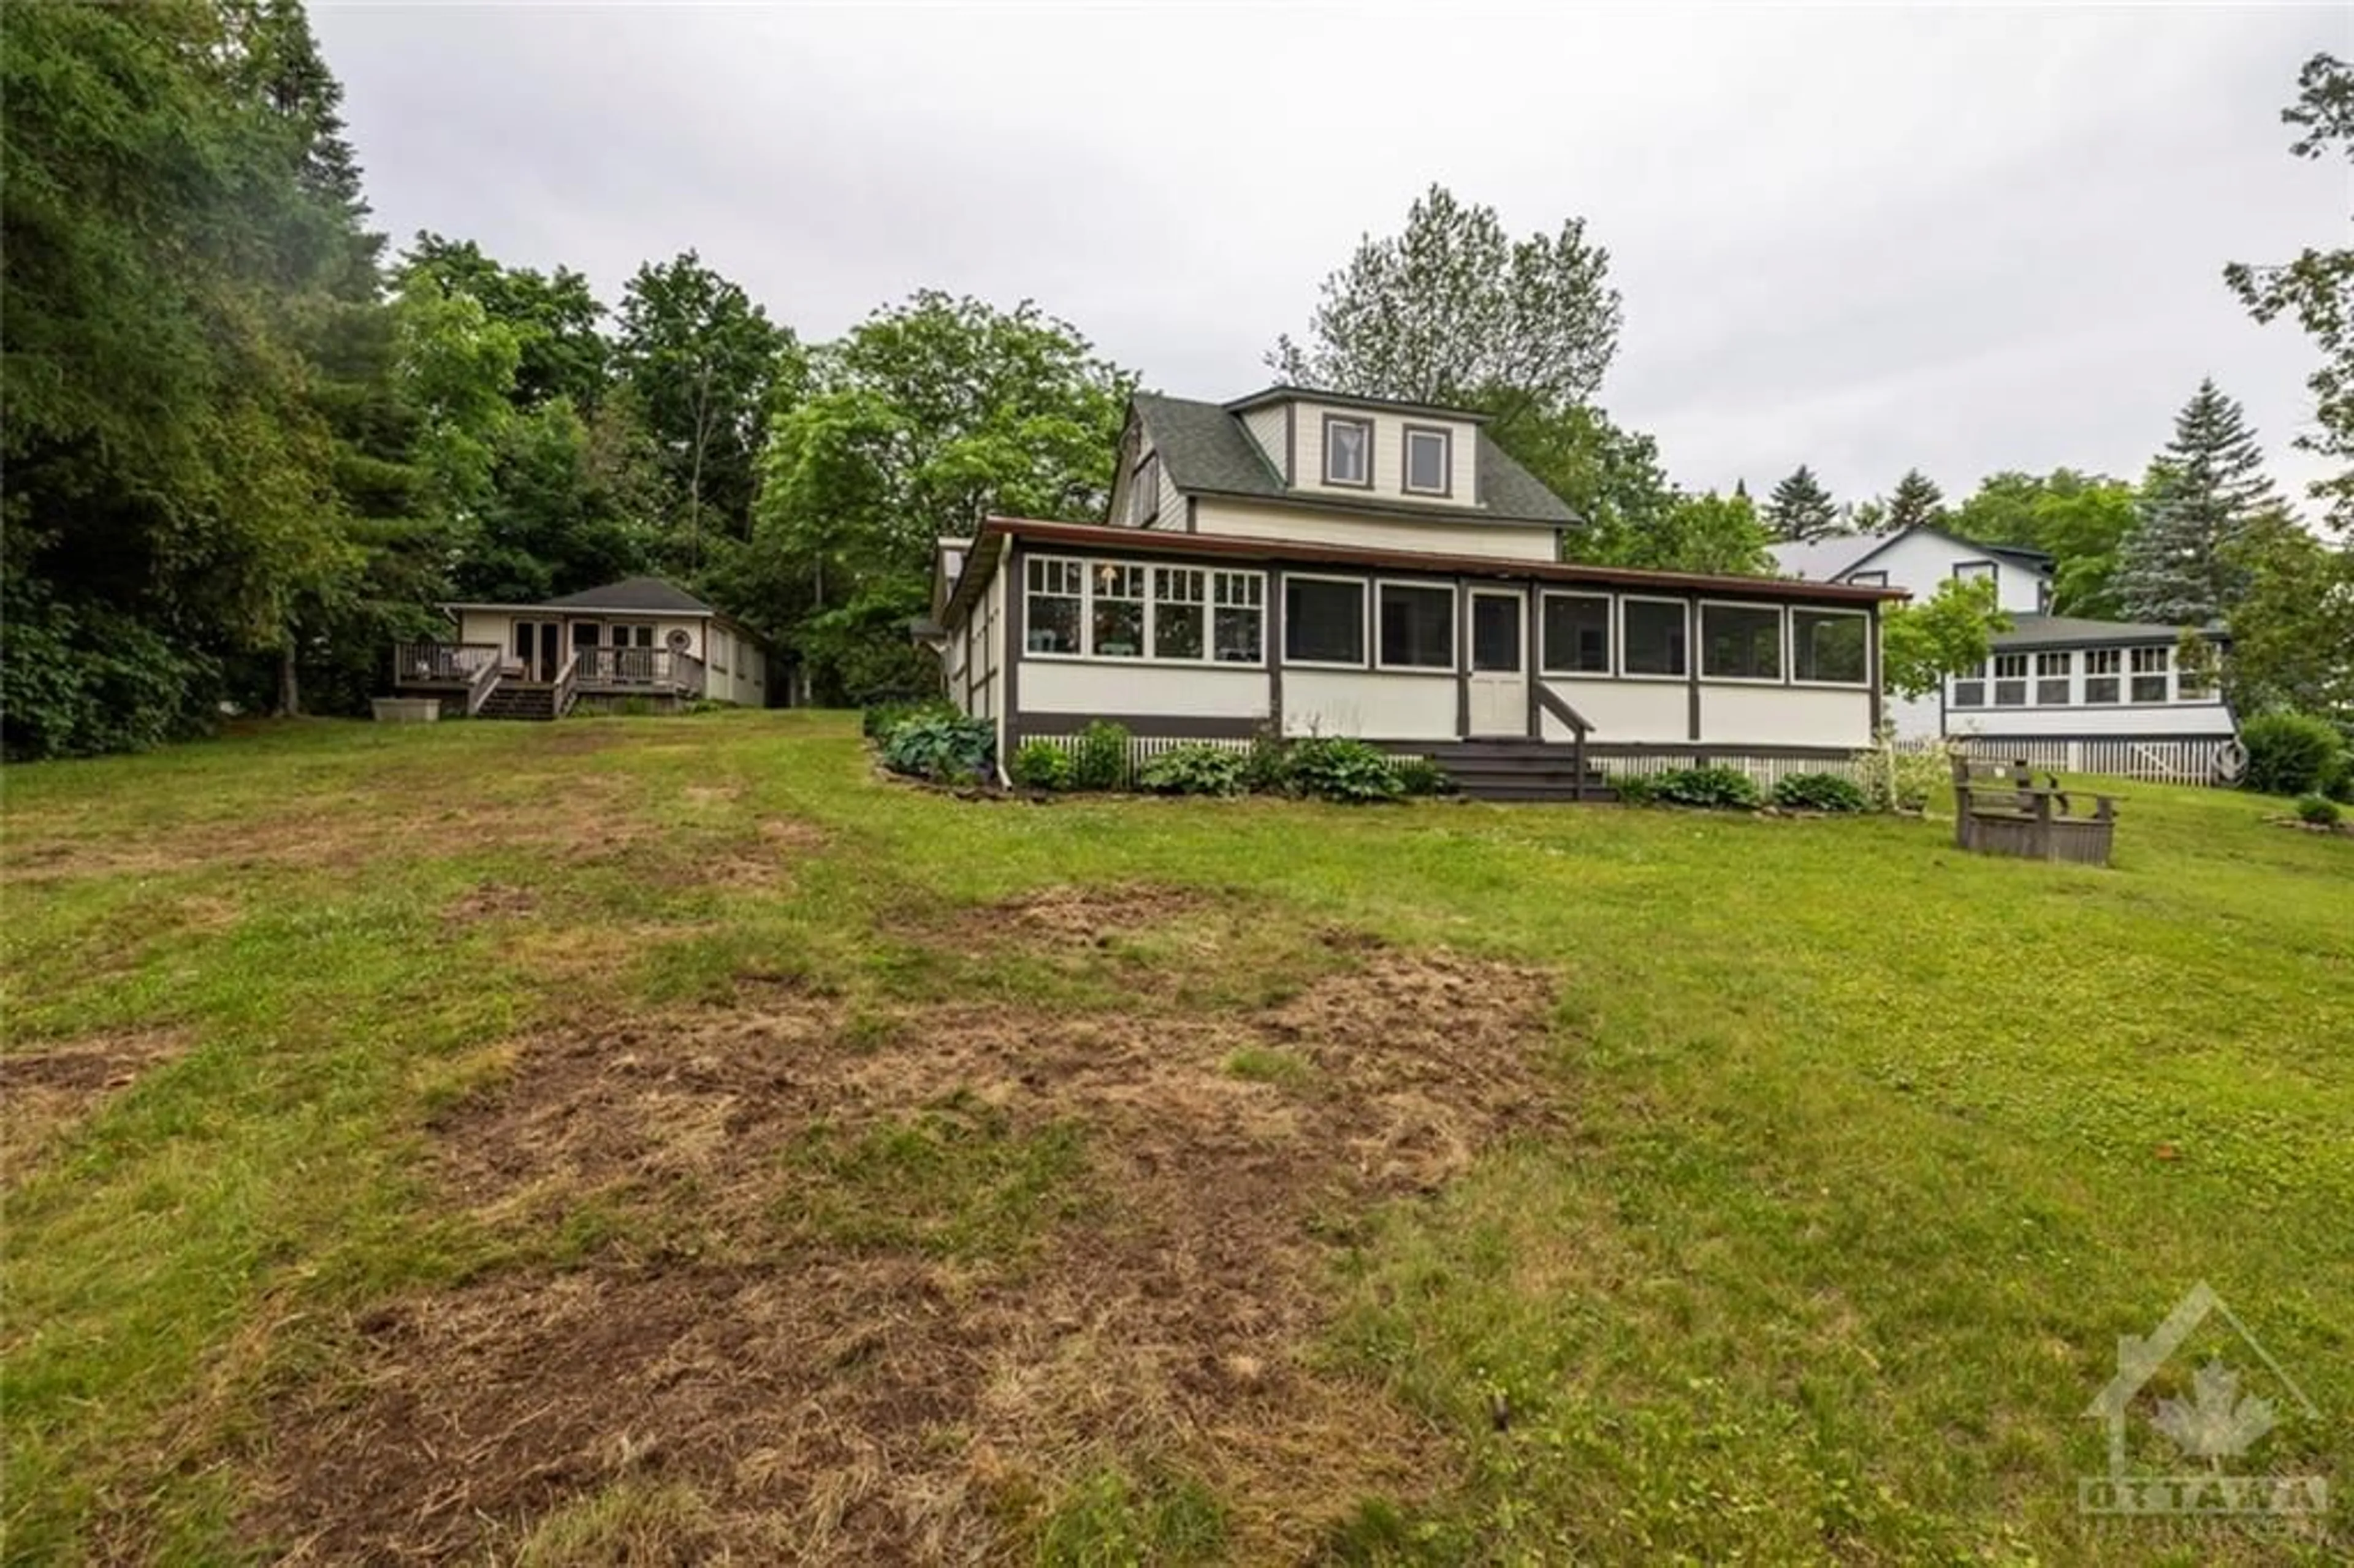 Cottage for 14 R3 Rd, Lombardy Ontario K0G 1L0